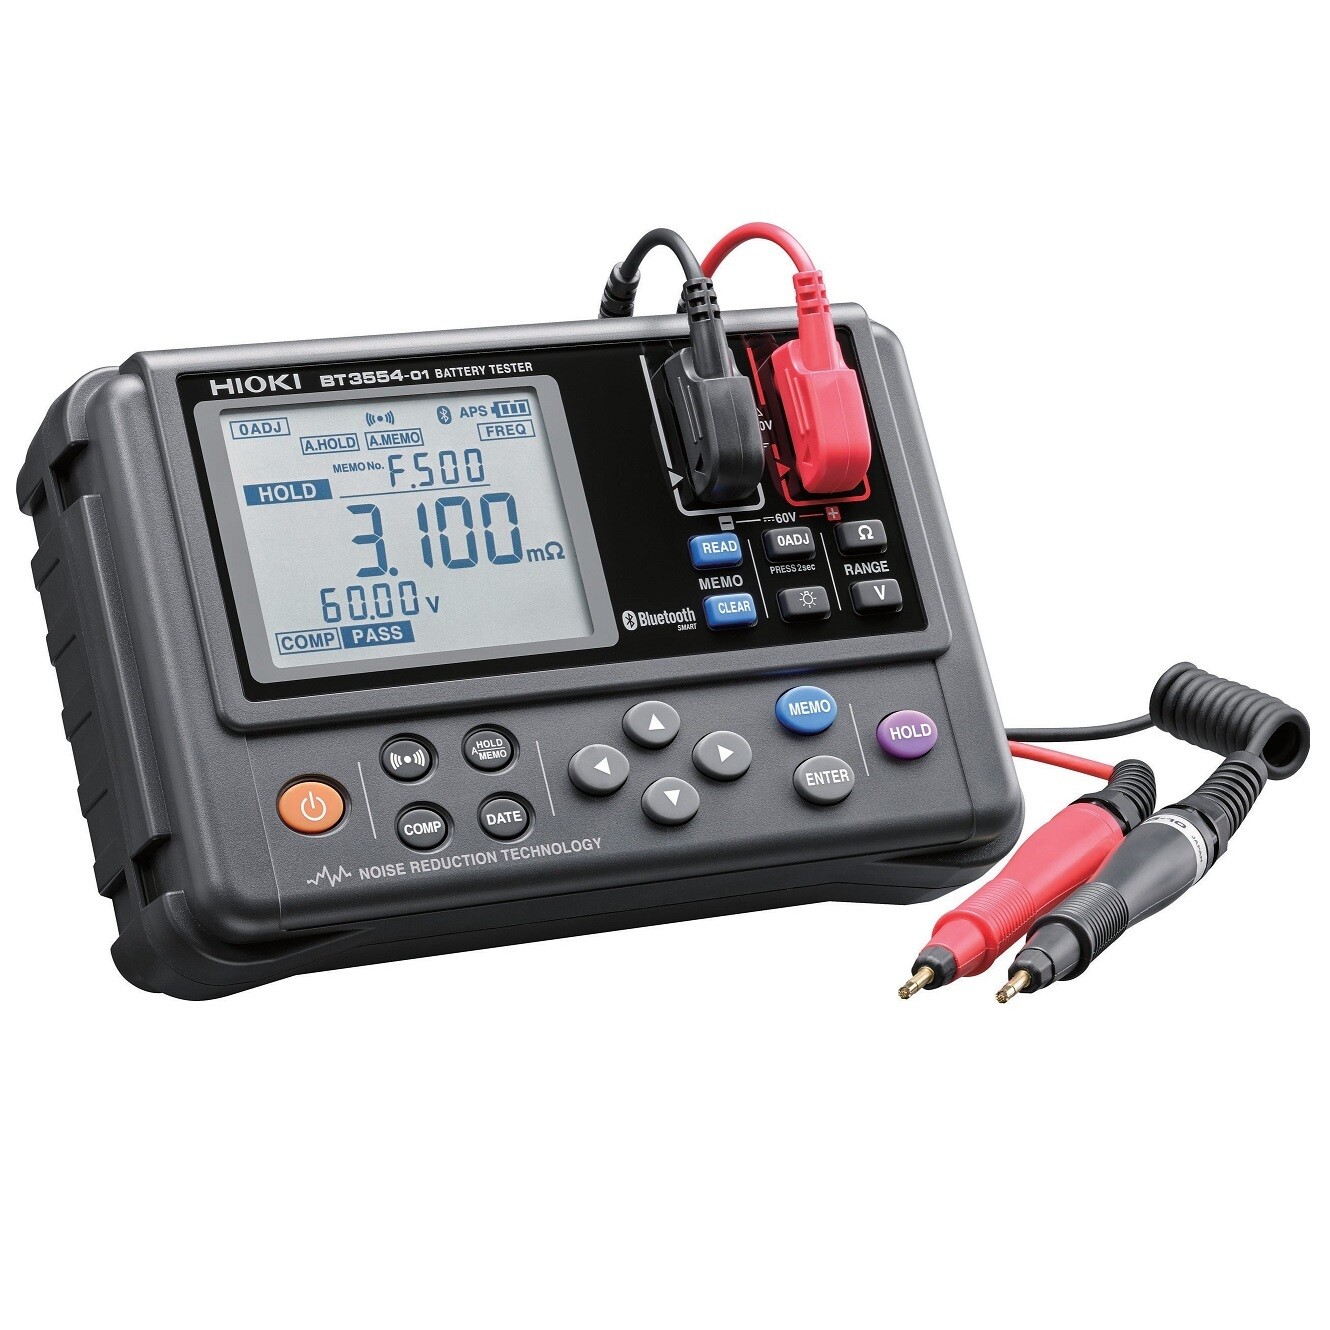 Hioki BT3554-01 Battery Tester for Lead Acid Batteries with Bluetooth connectivity